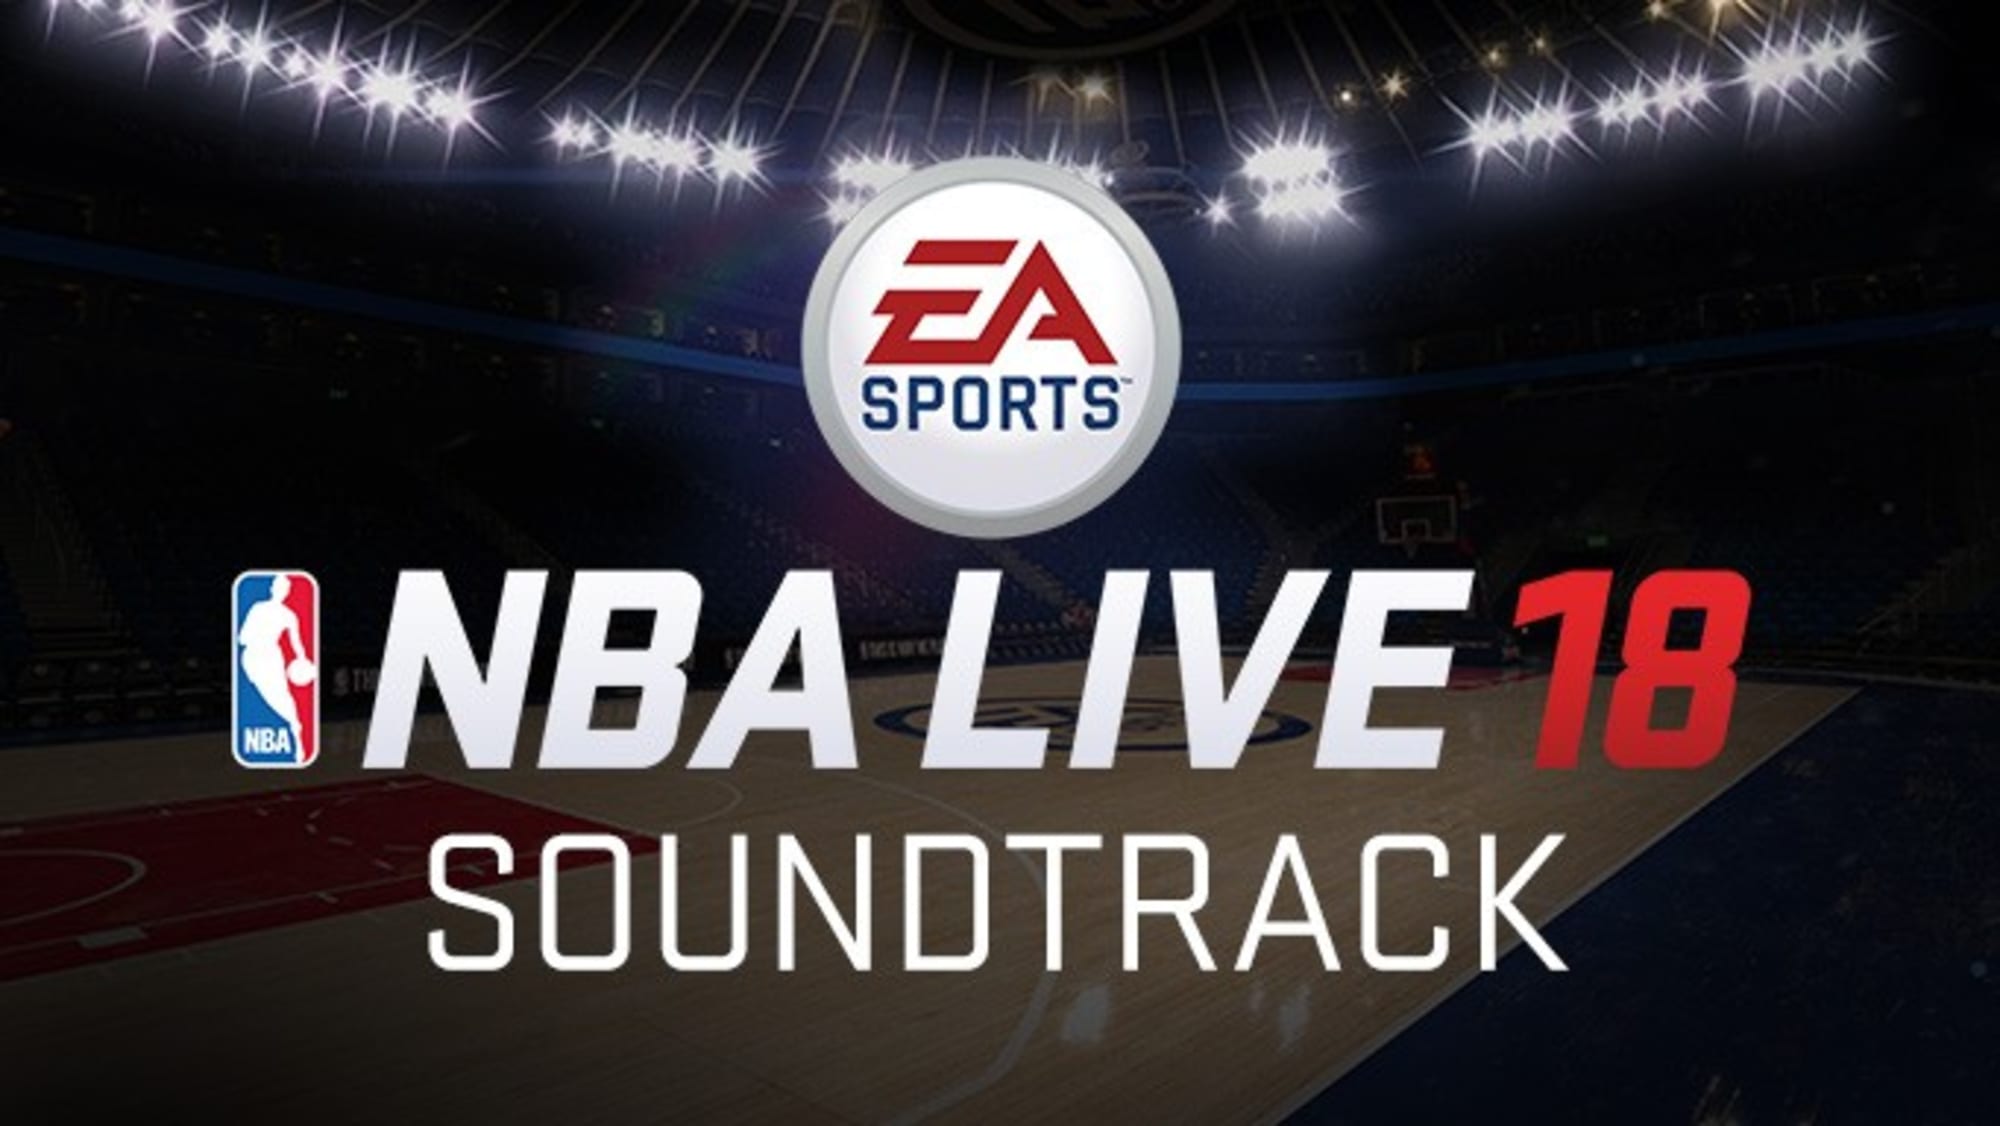 vlinder Peregrination Drank Check out the complete NBA LIVE 18 soundtrack, available on Spotify